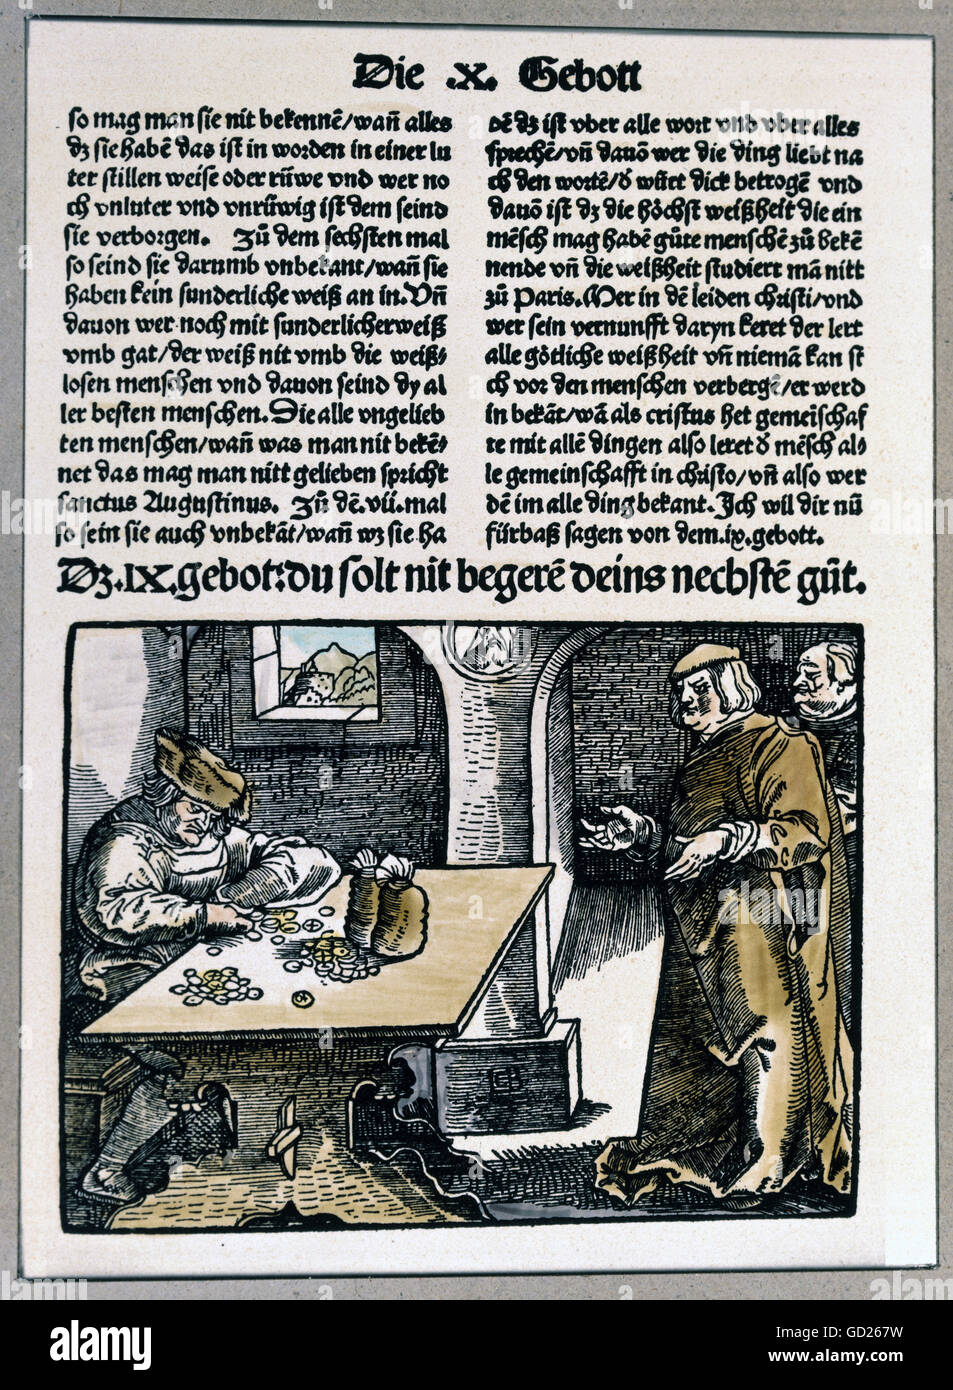 money, money changer and profiteer, coloured woodcut by Hans Baldung Grien, 'Die zehen gebot erclert und usgelegt', 9th Commandment, 'Though shalt not covet your neighbor's goods', printed by Hans Grueninger, Strassbourg, 1516, private collection, Additional-Rights-Clearences-Not Available Stock Photo